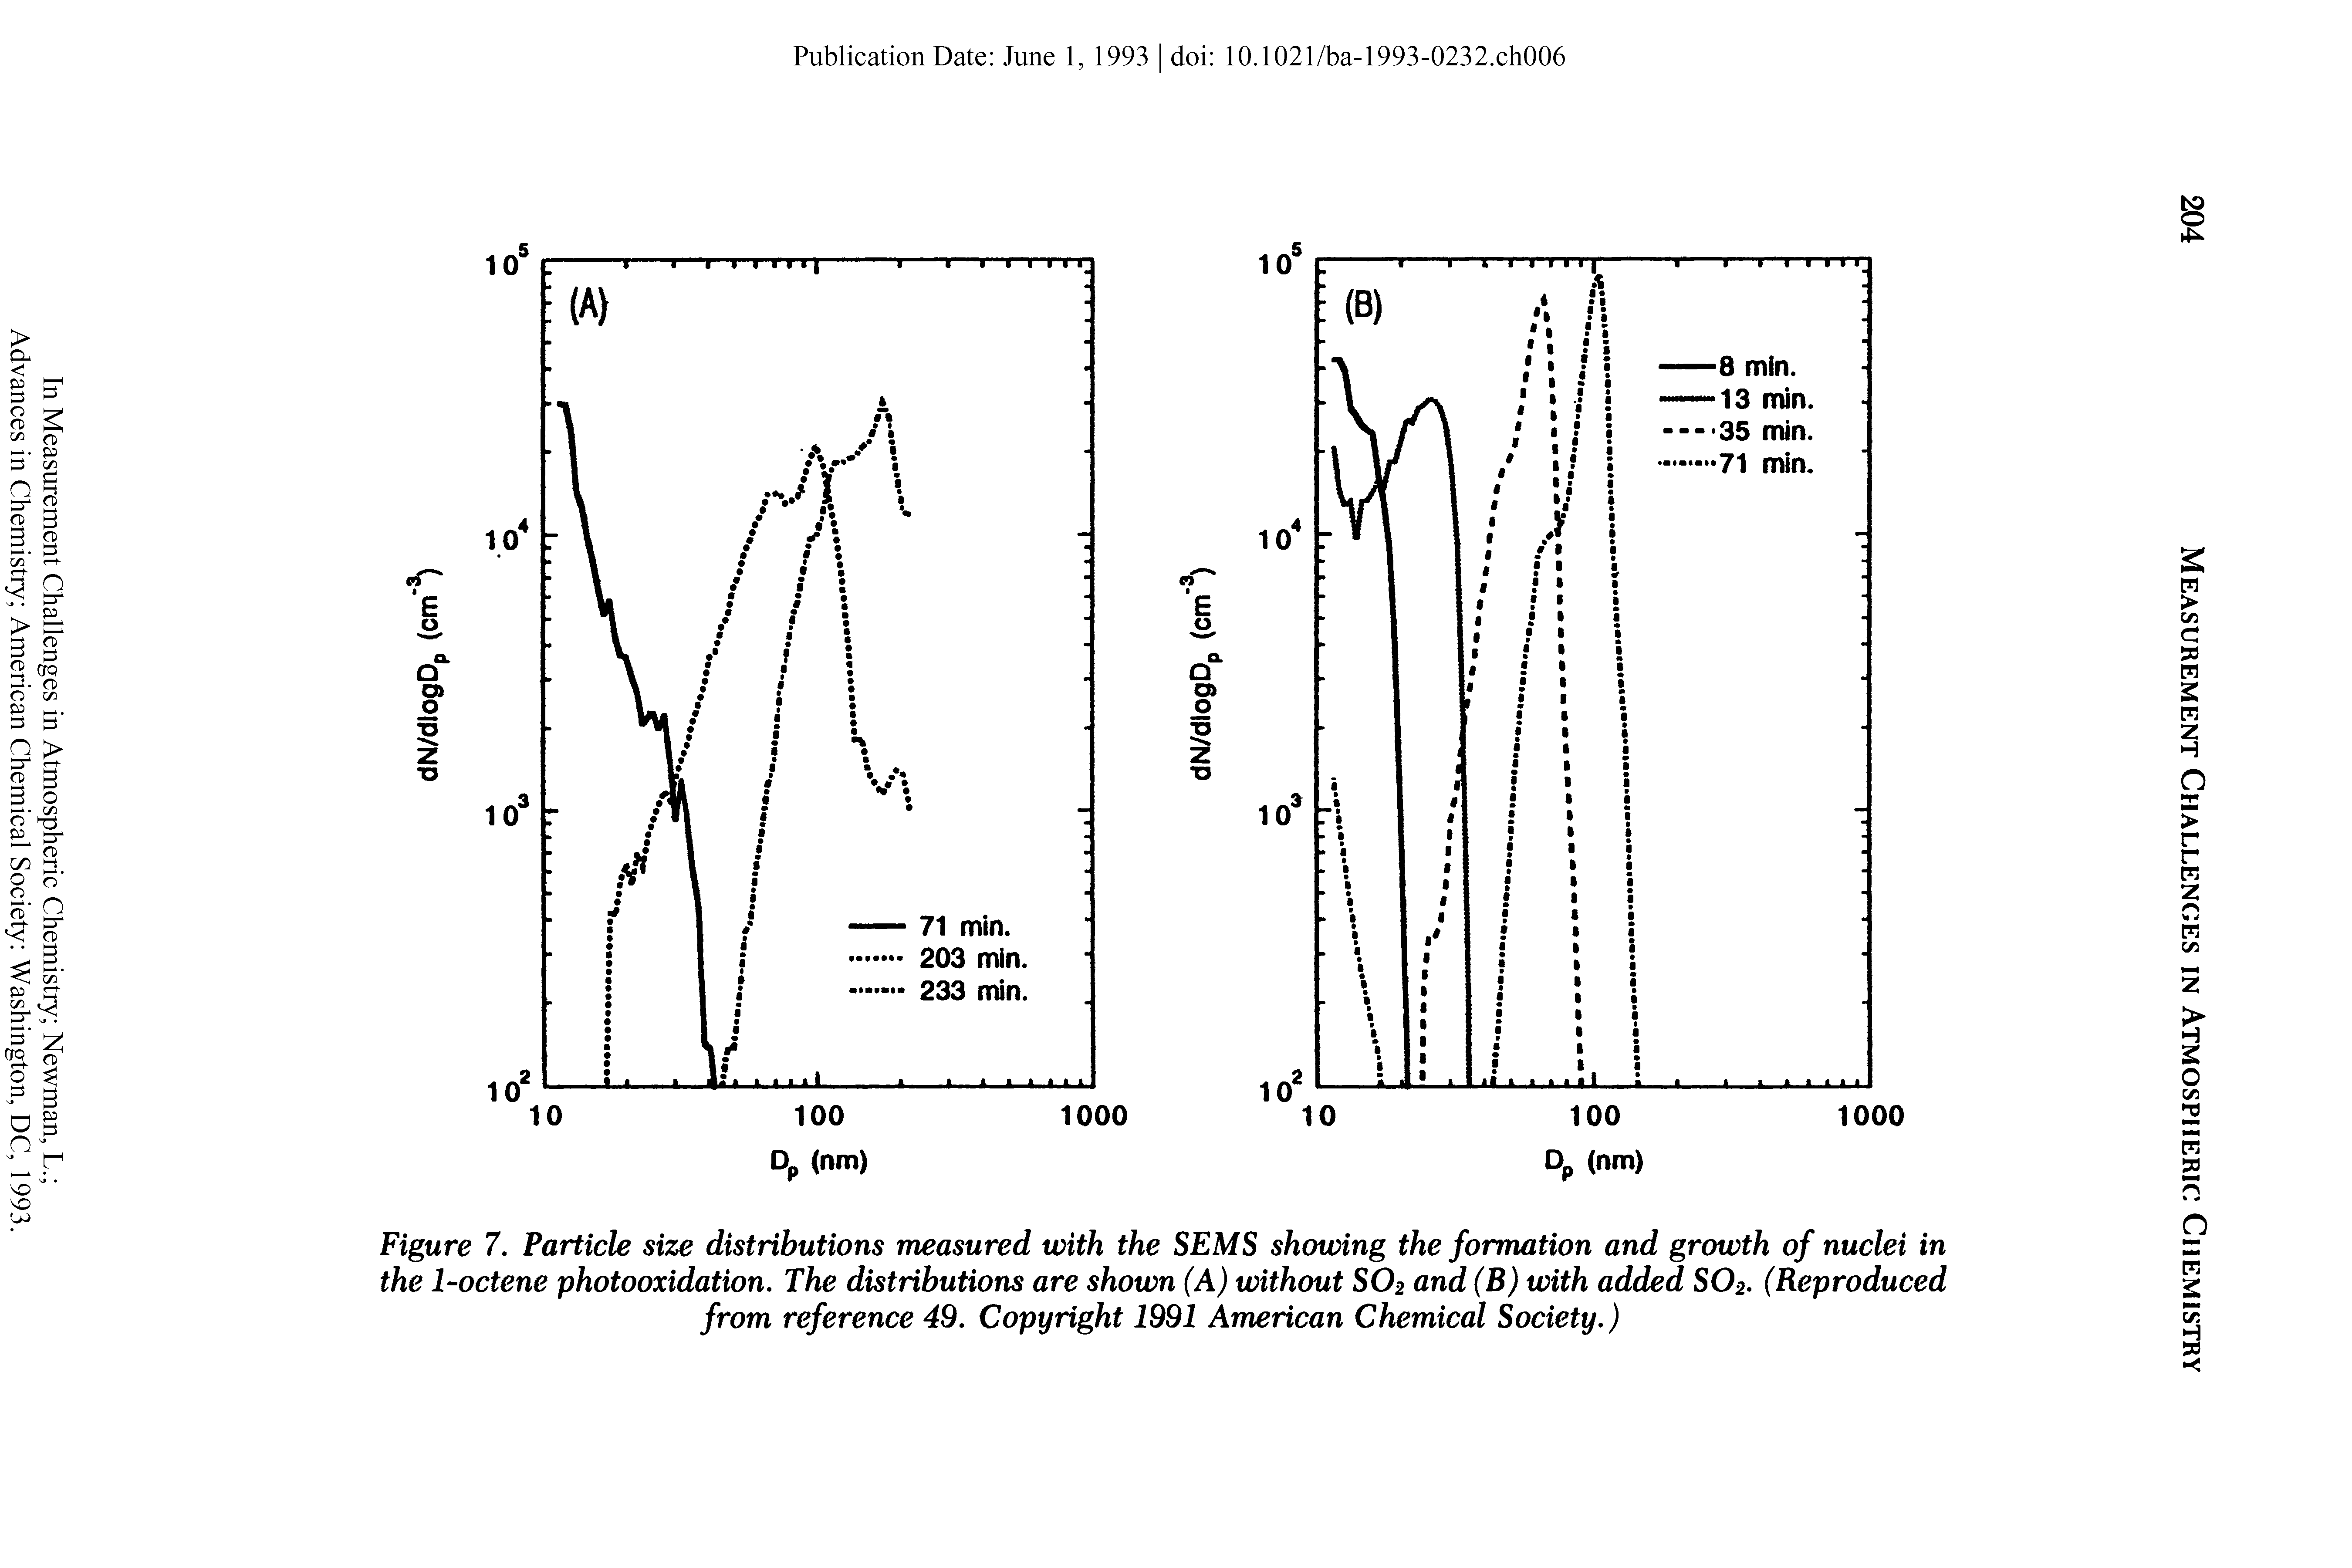 Figure 7. Particle size distributions measured with the SEMS showing the formation and growth of nuclei in the 1-octene photooxidation. The distributions are shown (A) without S02 and (B)with added S02. (Reproduced from reference 49. Copyright 1991 American Chemical Society.)...